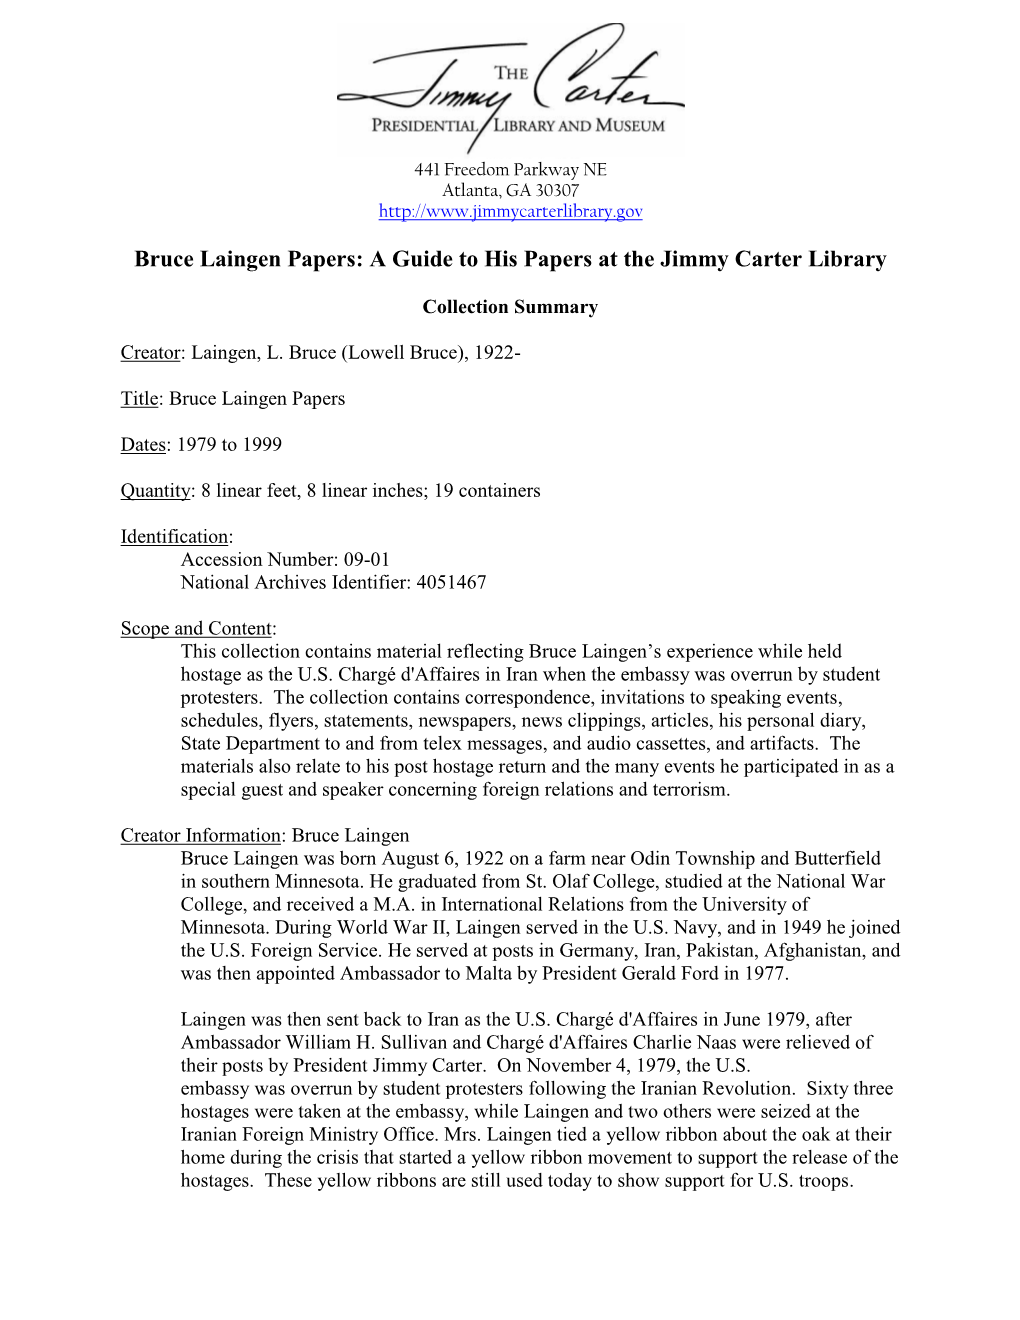 Bruce Laingen Papers: a Guide to His Papers at the Jimmy Carter Library